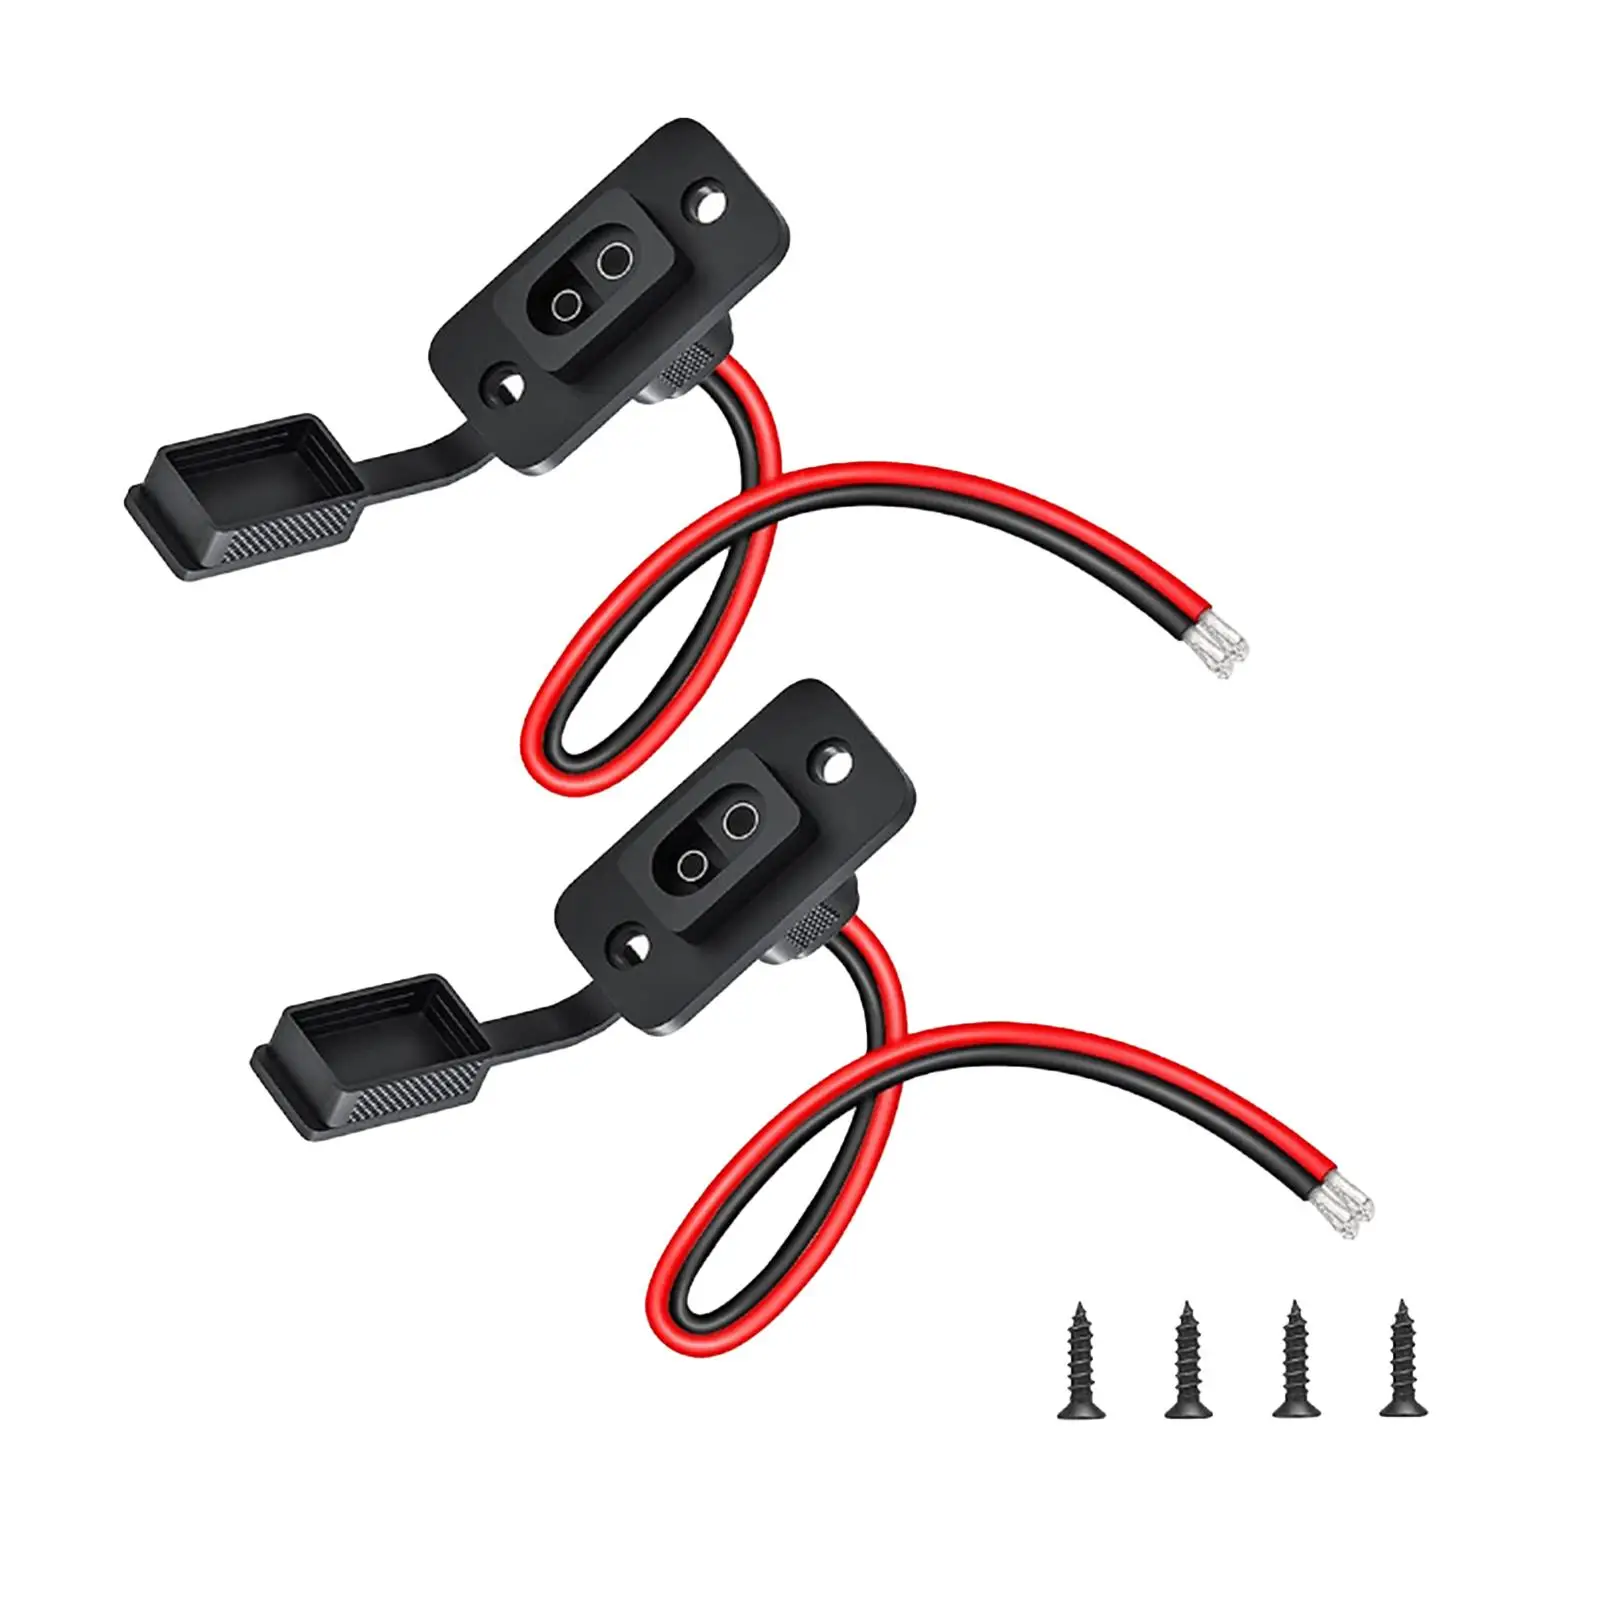 2 Pieces SAE Socket RV Waterproof Cap Weatherproof SAE Connector Connector Cables Wire 12AWG DC Power Automotive Extension Cord